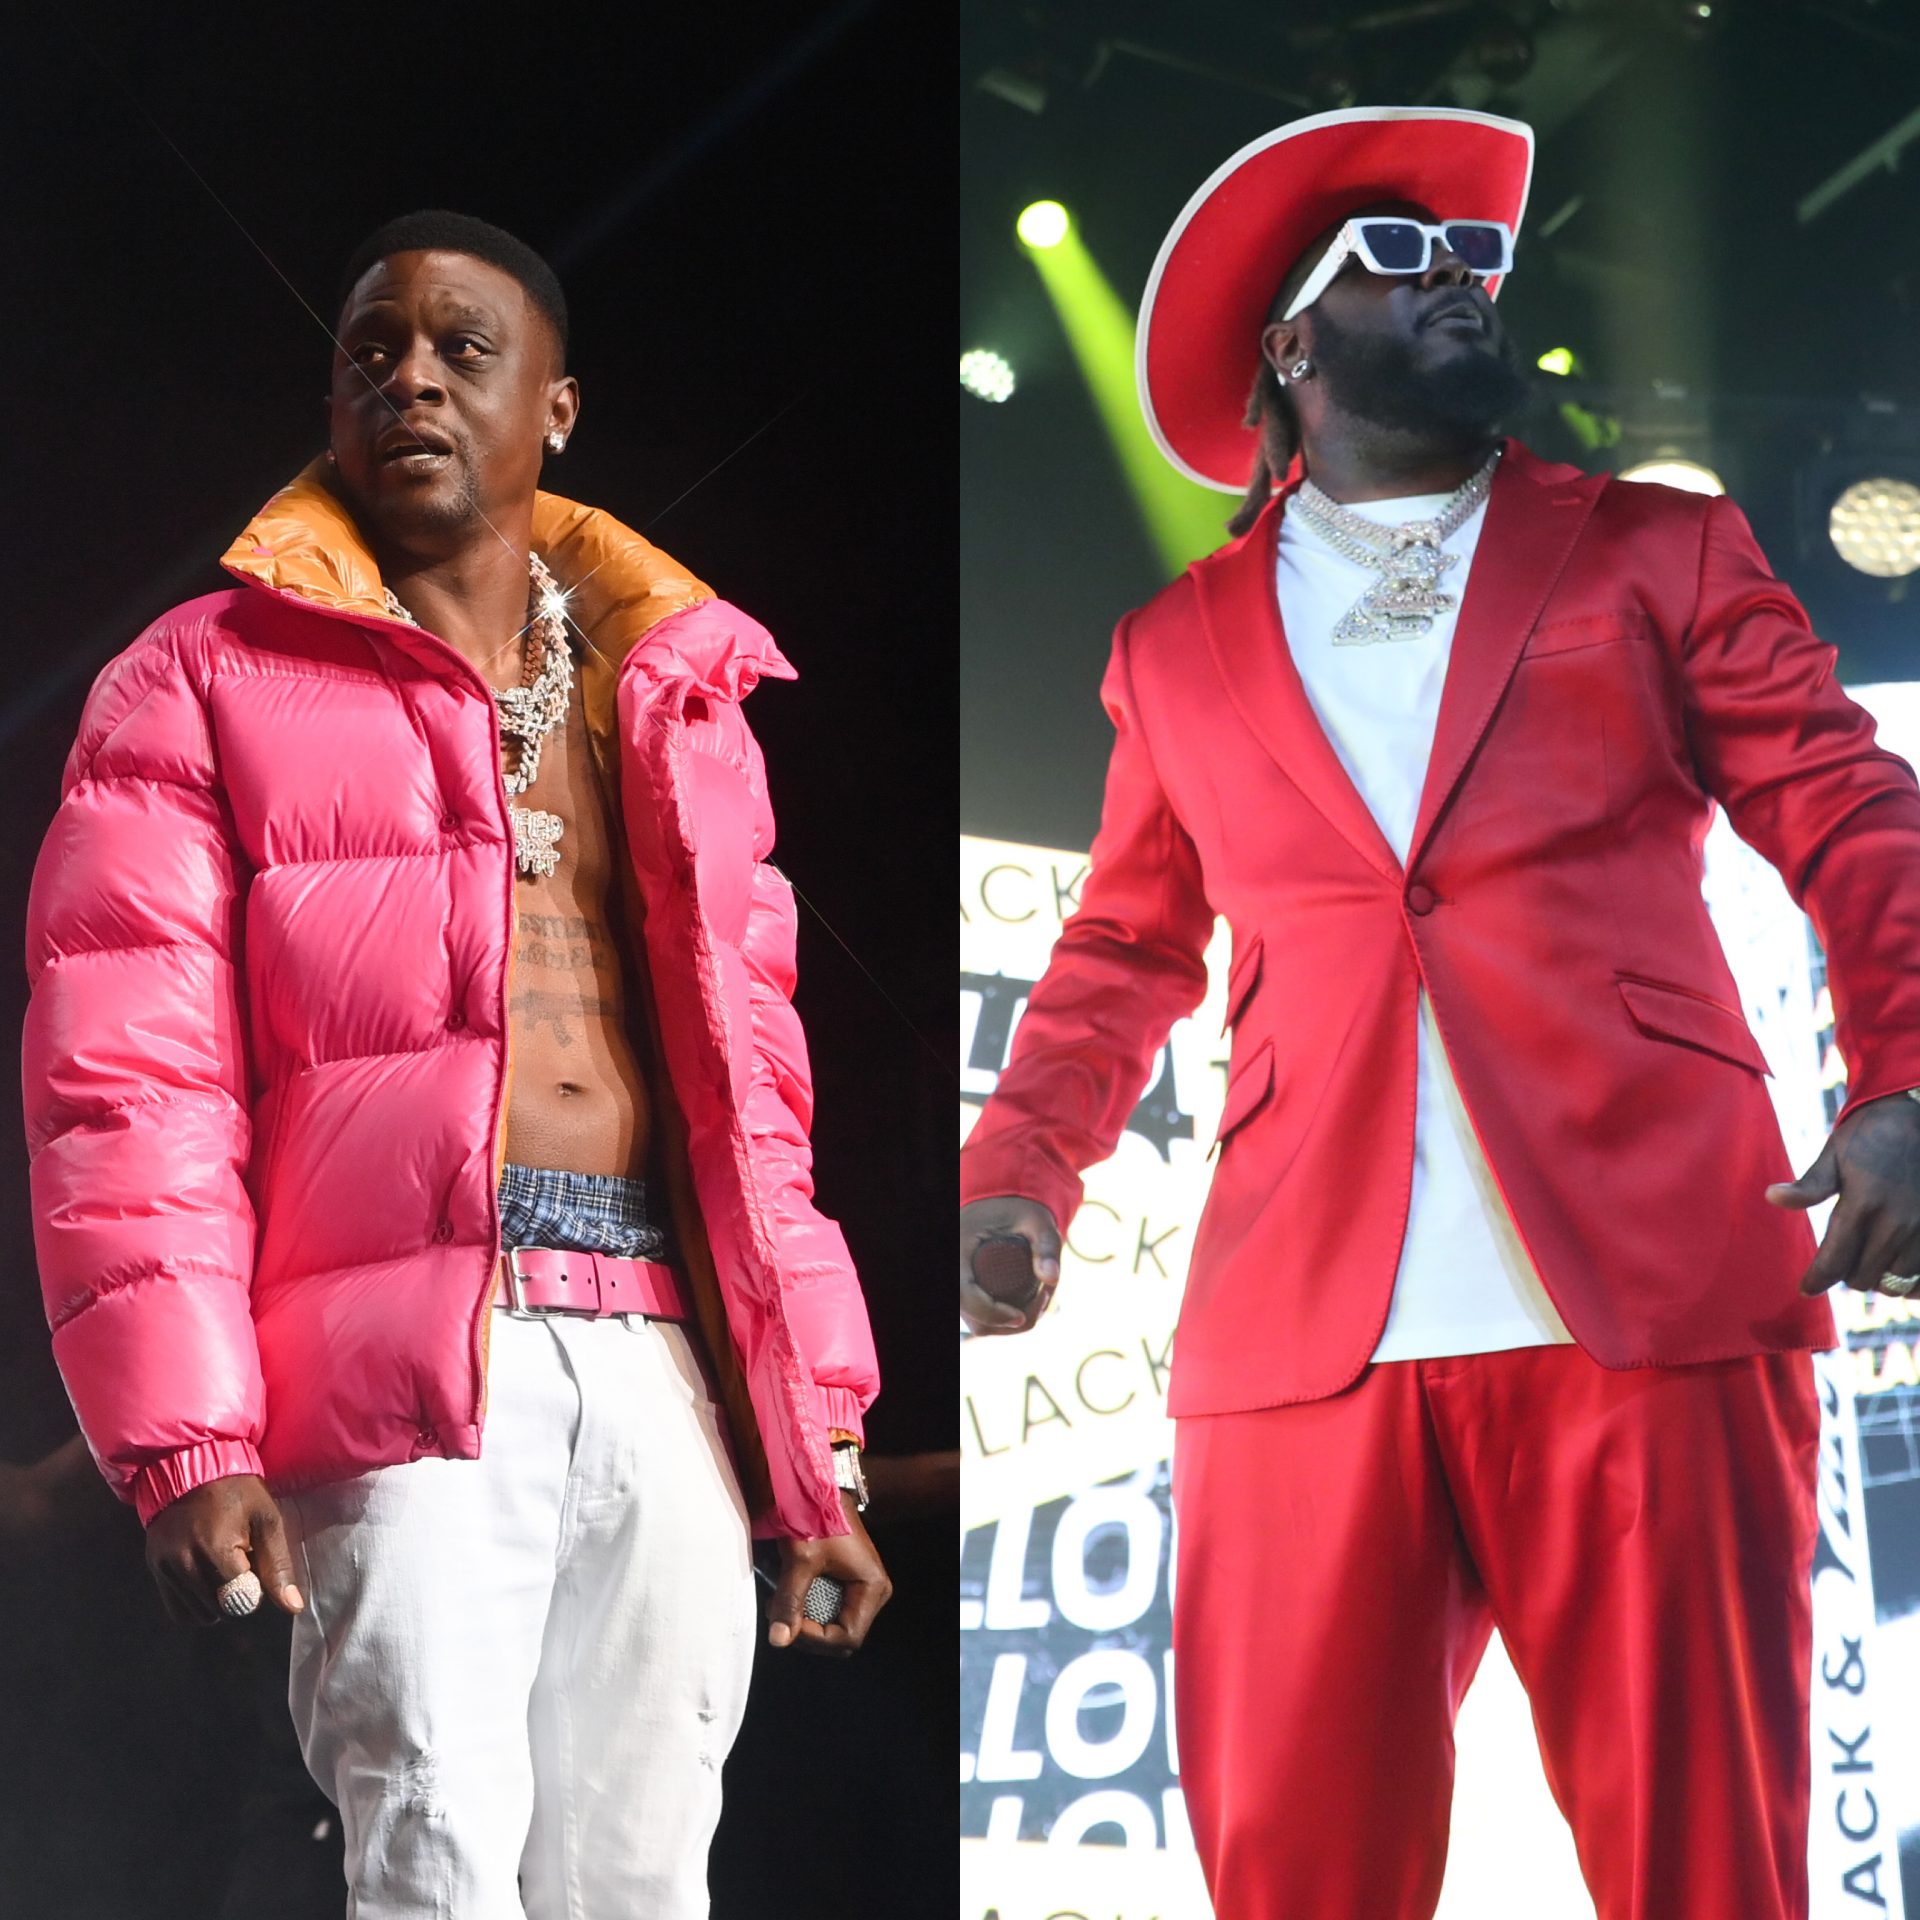 Boosie Disagrees With T-Pain’s Comments He Made About Tupac